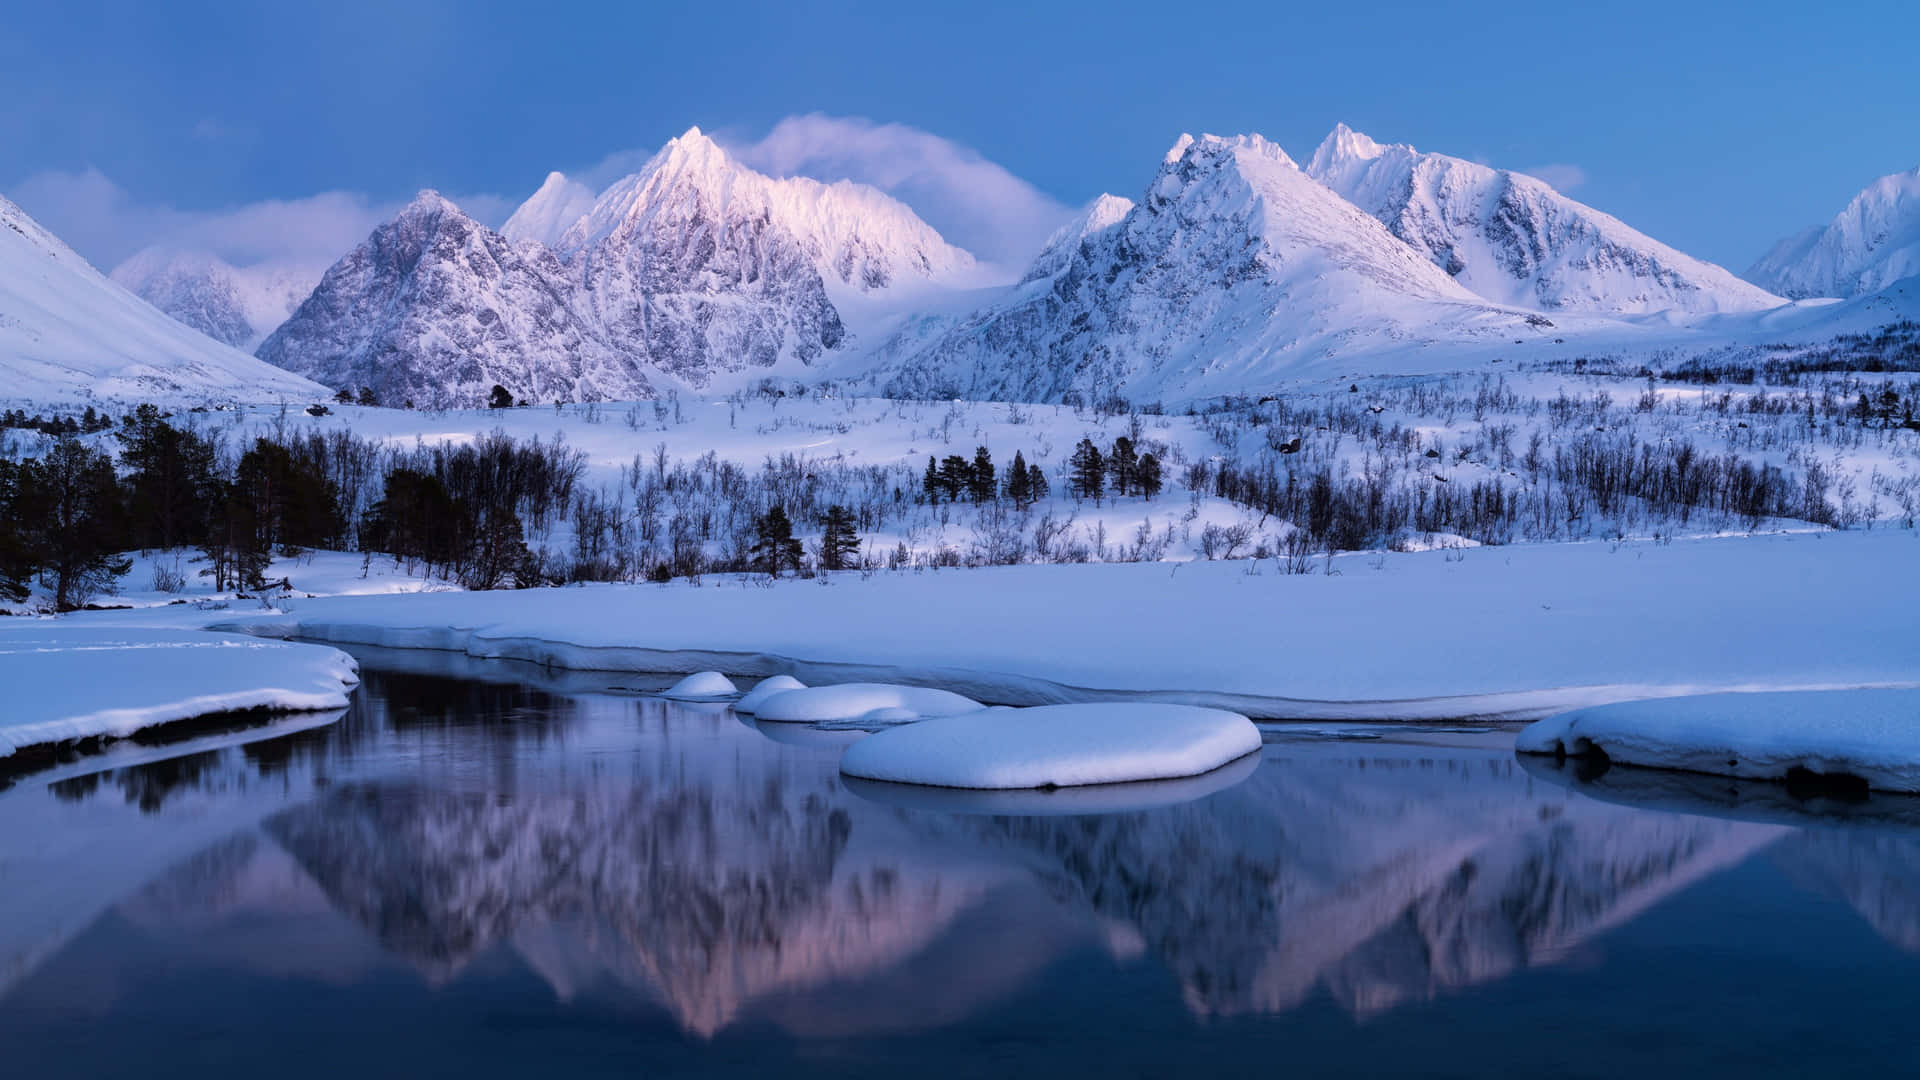 A Snow Covered Mountain Range Is Reflected In A River